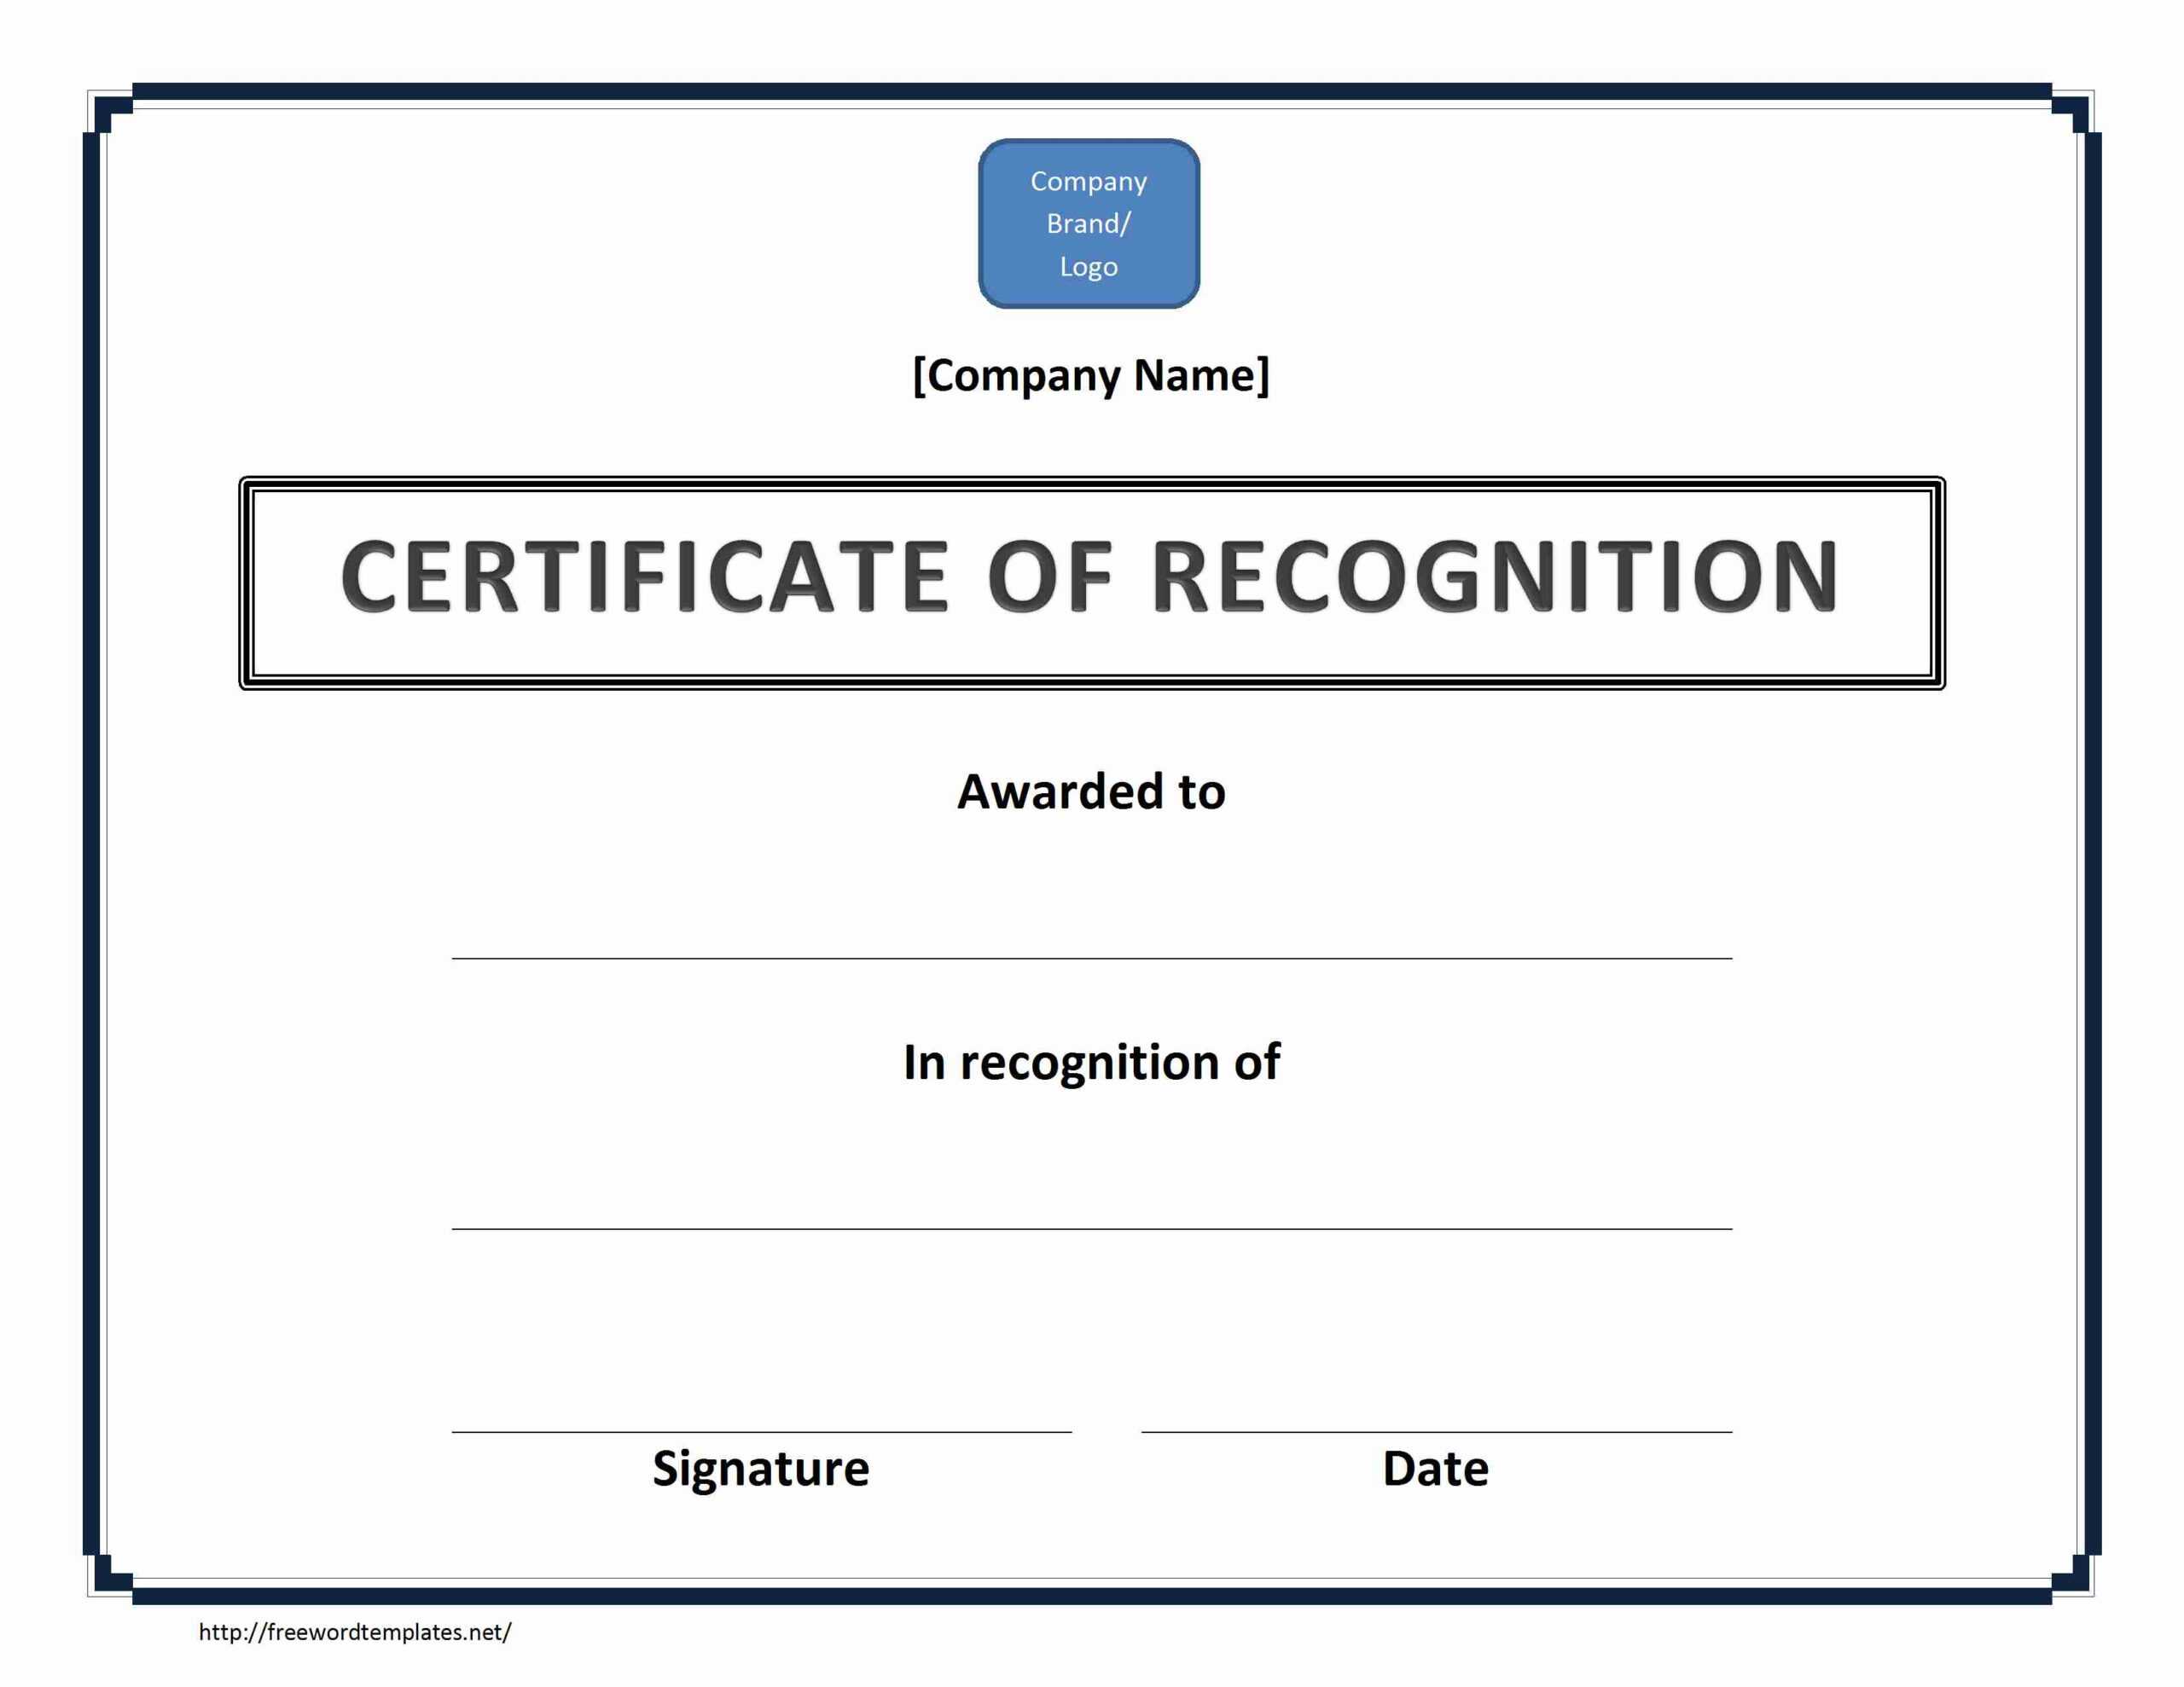 Certificate Of Recognition Doc File With Regard To Recognition Of Service Certificate Template